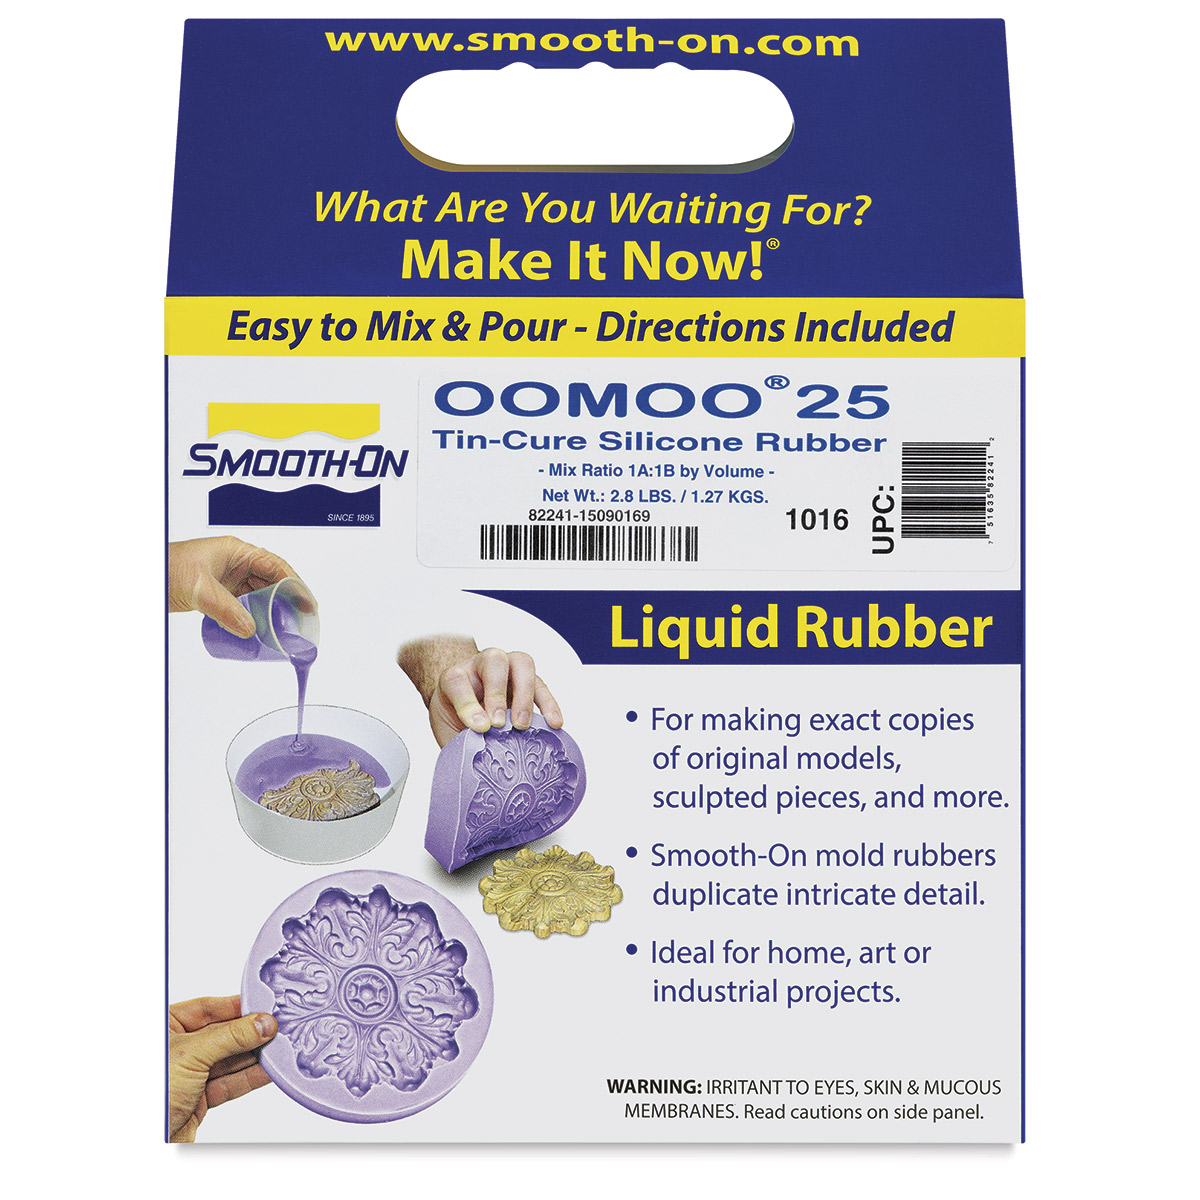 Smooth-On Oomoo 25 Silicone Rubber, 2.8 lbs 